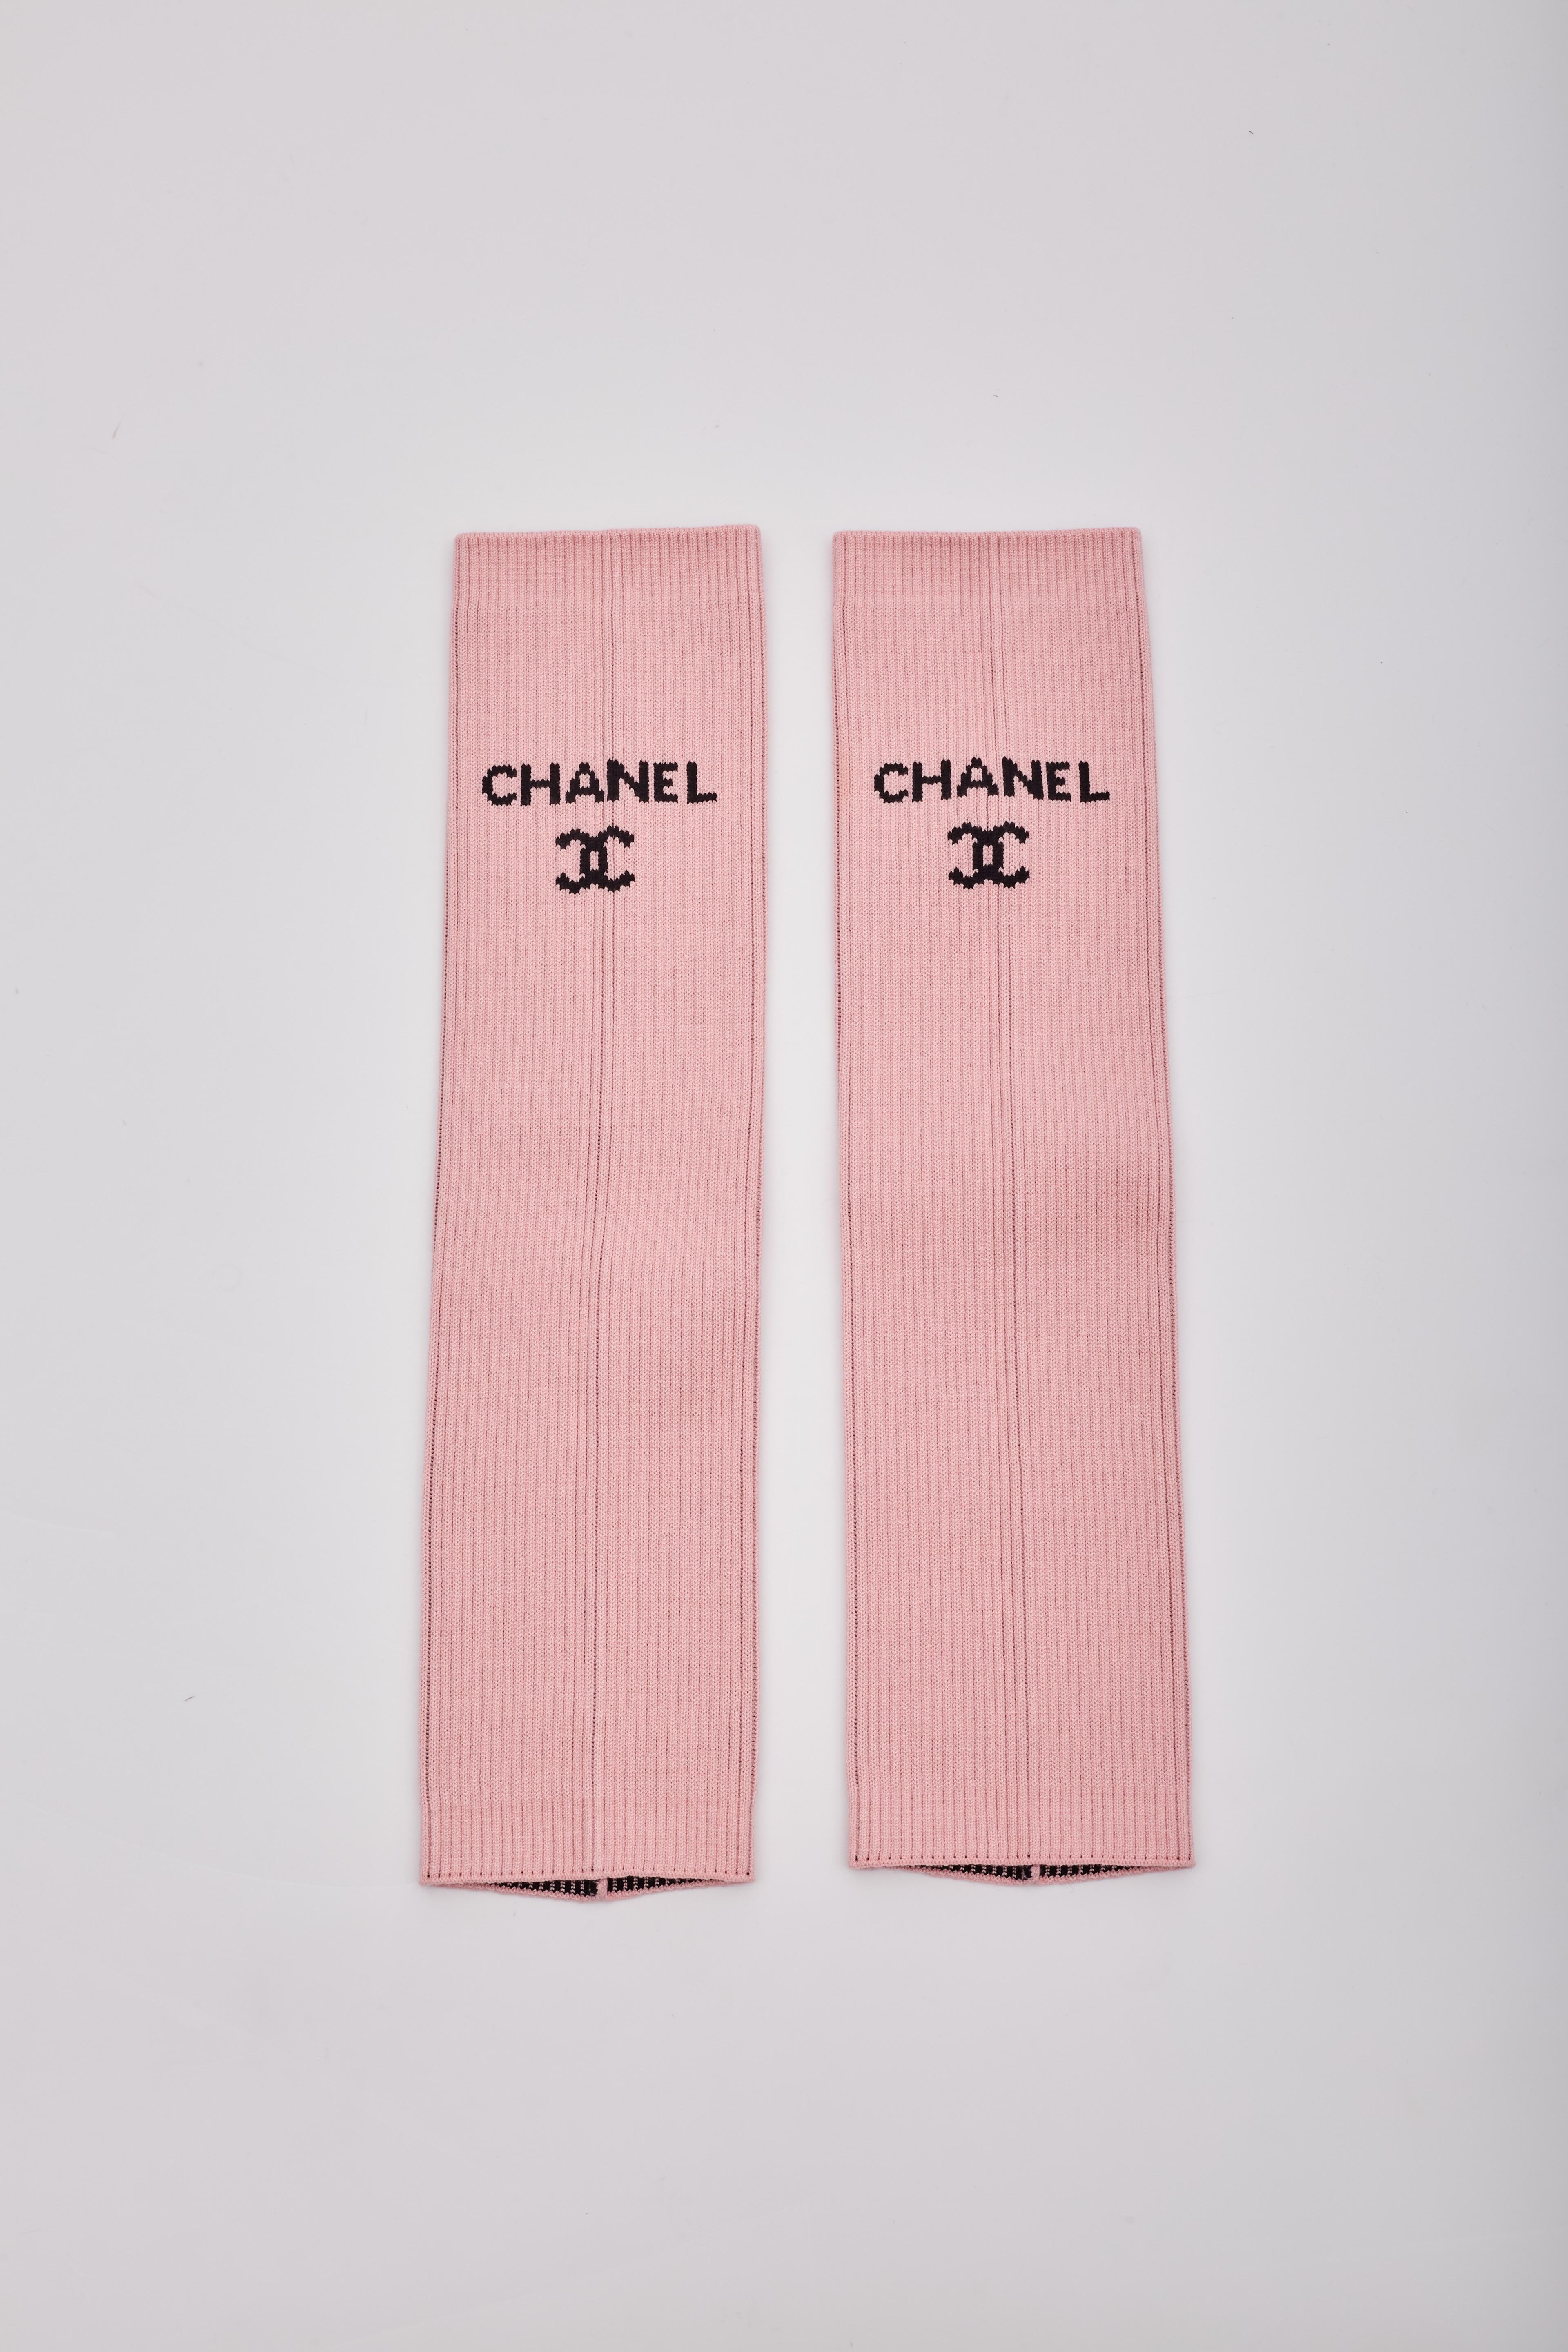 Chanel Logo Pink Knit Leg Warmers Gaiters In New Condition For Sale In Montreal, Quebec